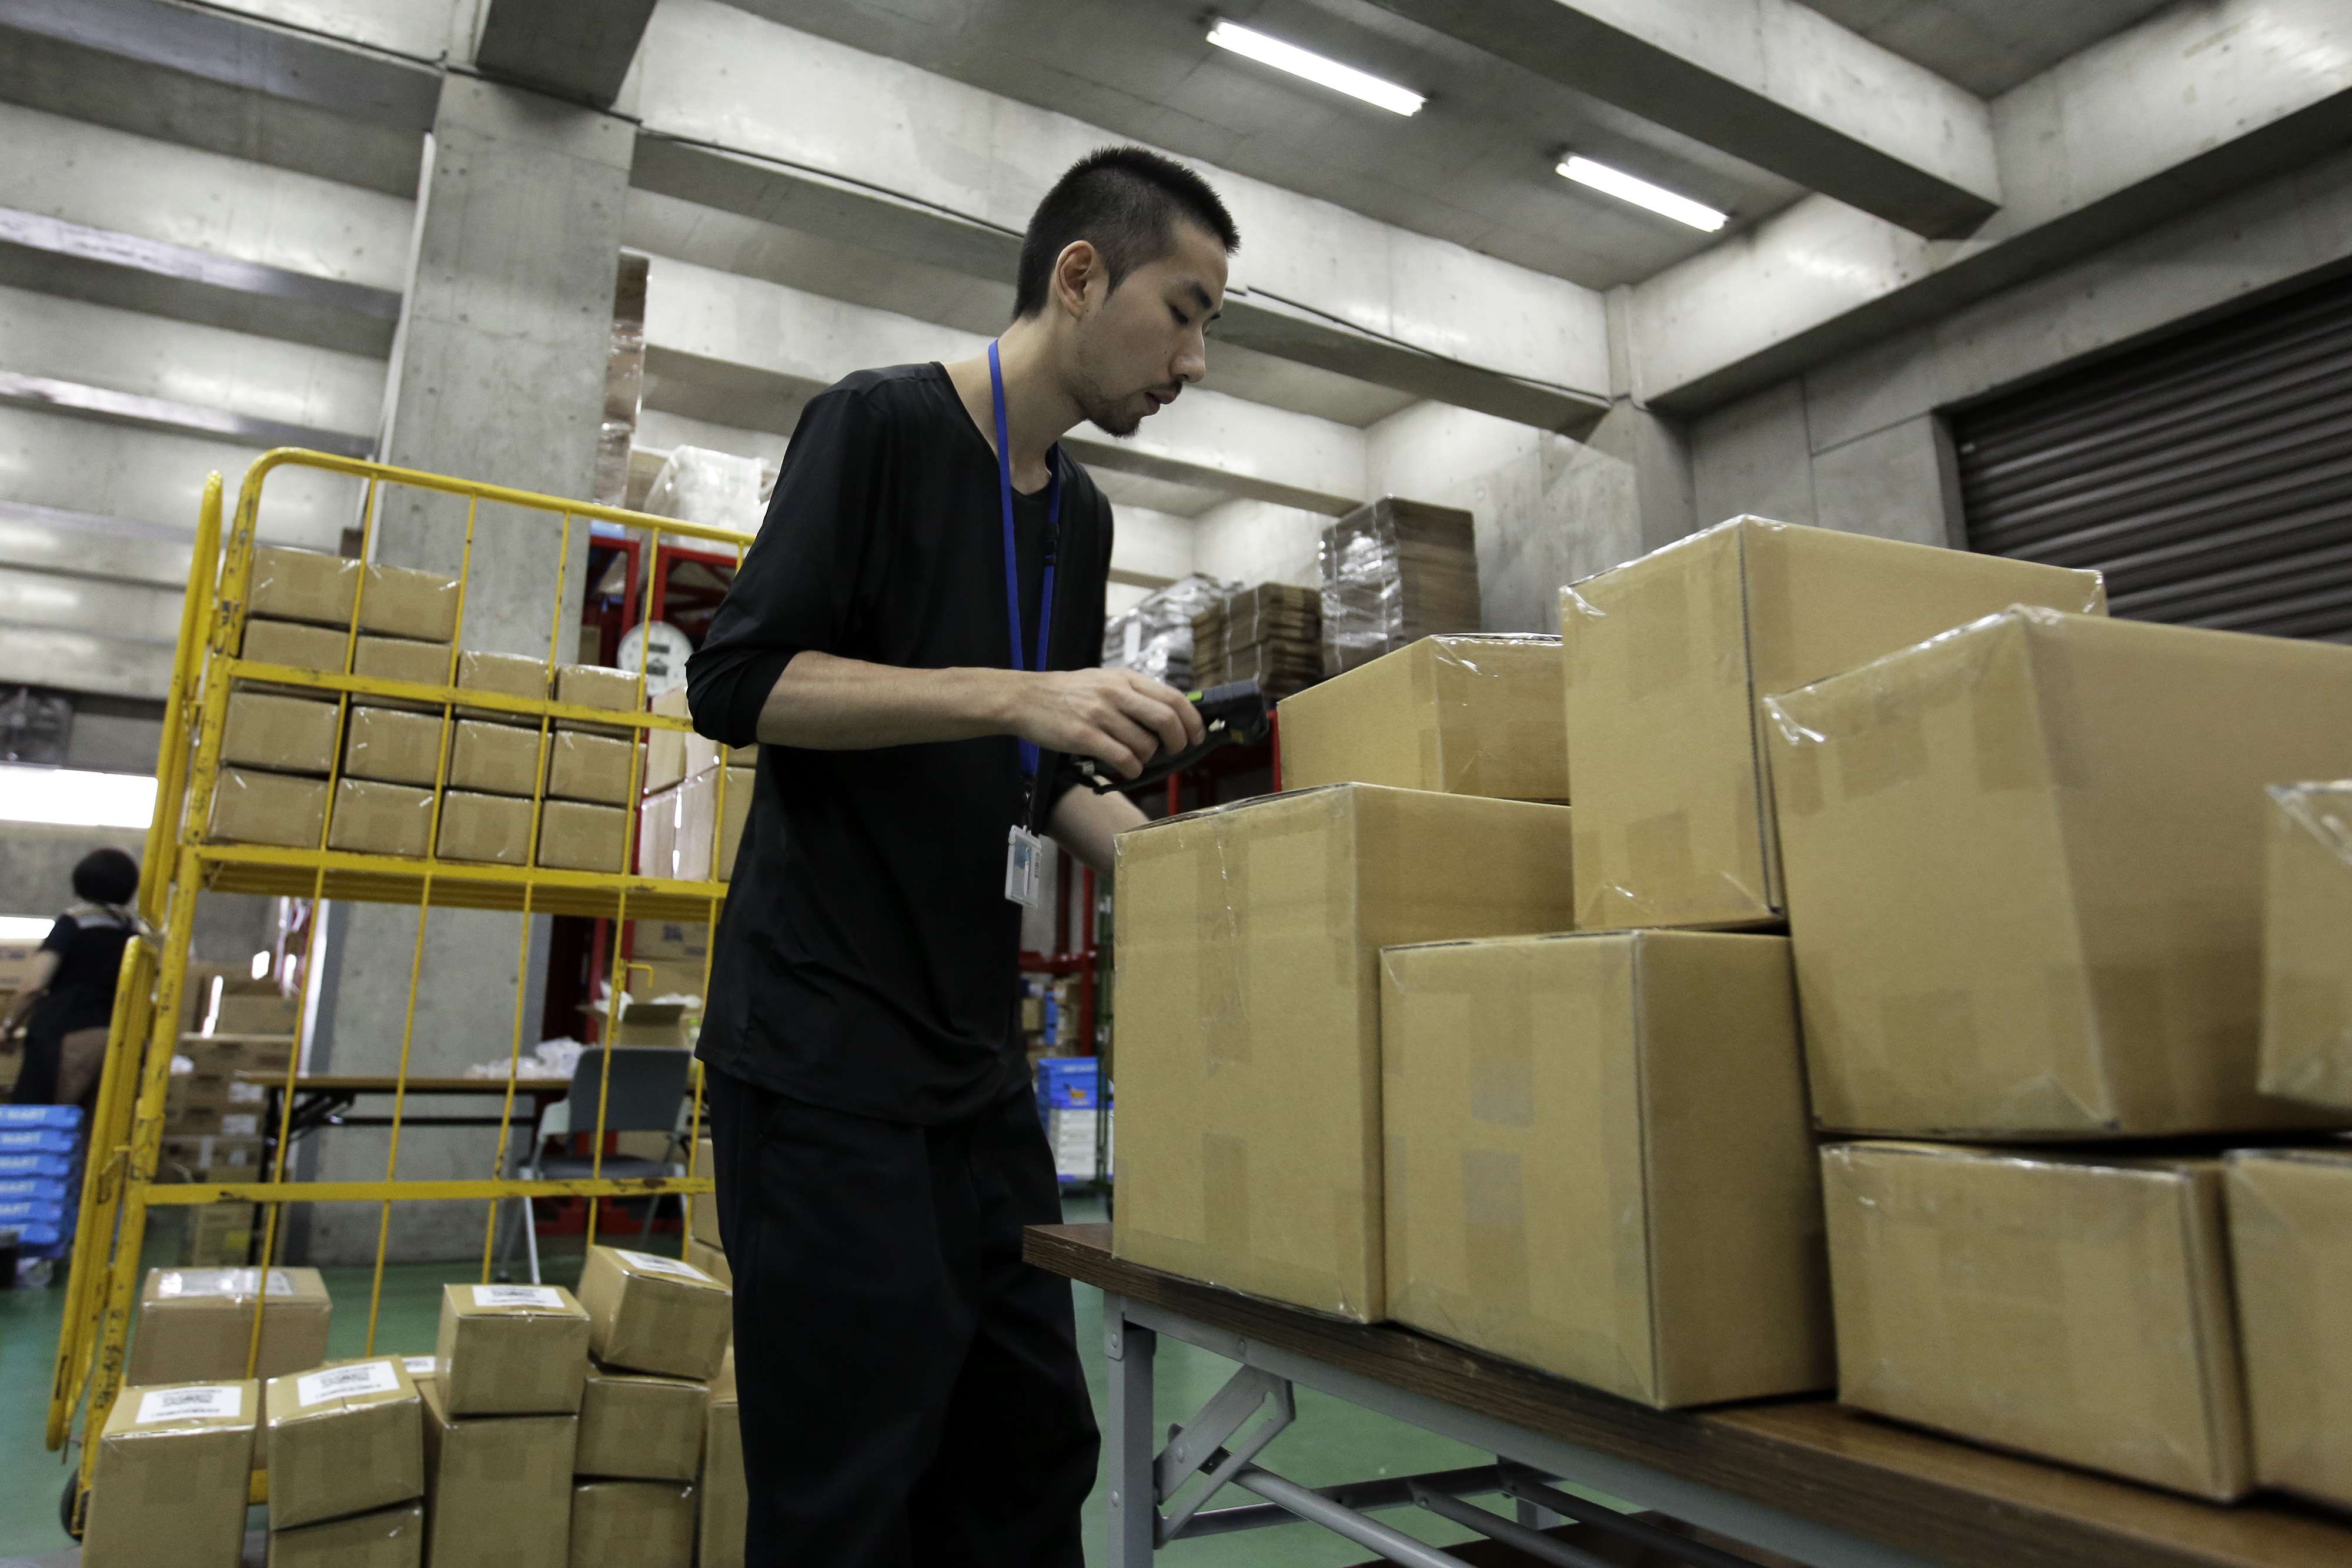 Online purchases of daily consumablesin China is expected to undergo steady growth as more consumers aged 30 and above shop over the internet. A Tokyo employee of Wandou, which ranked as one of most downloaded shopping apps in China in June. Photo: Bloomberg